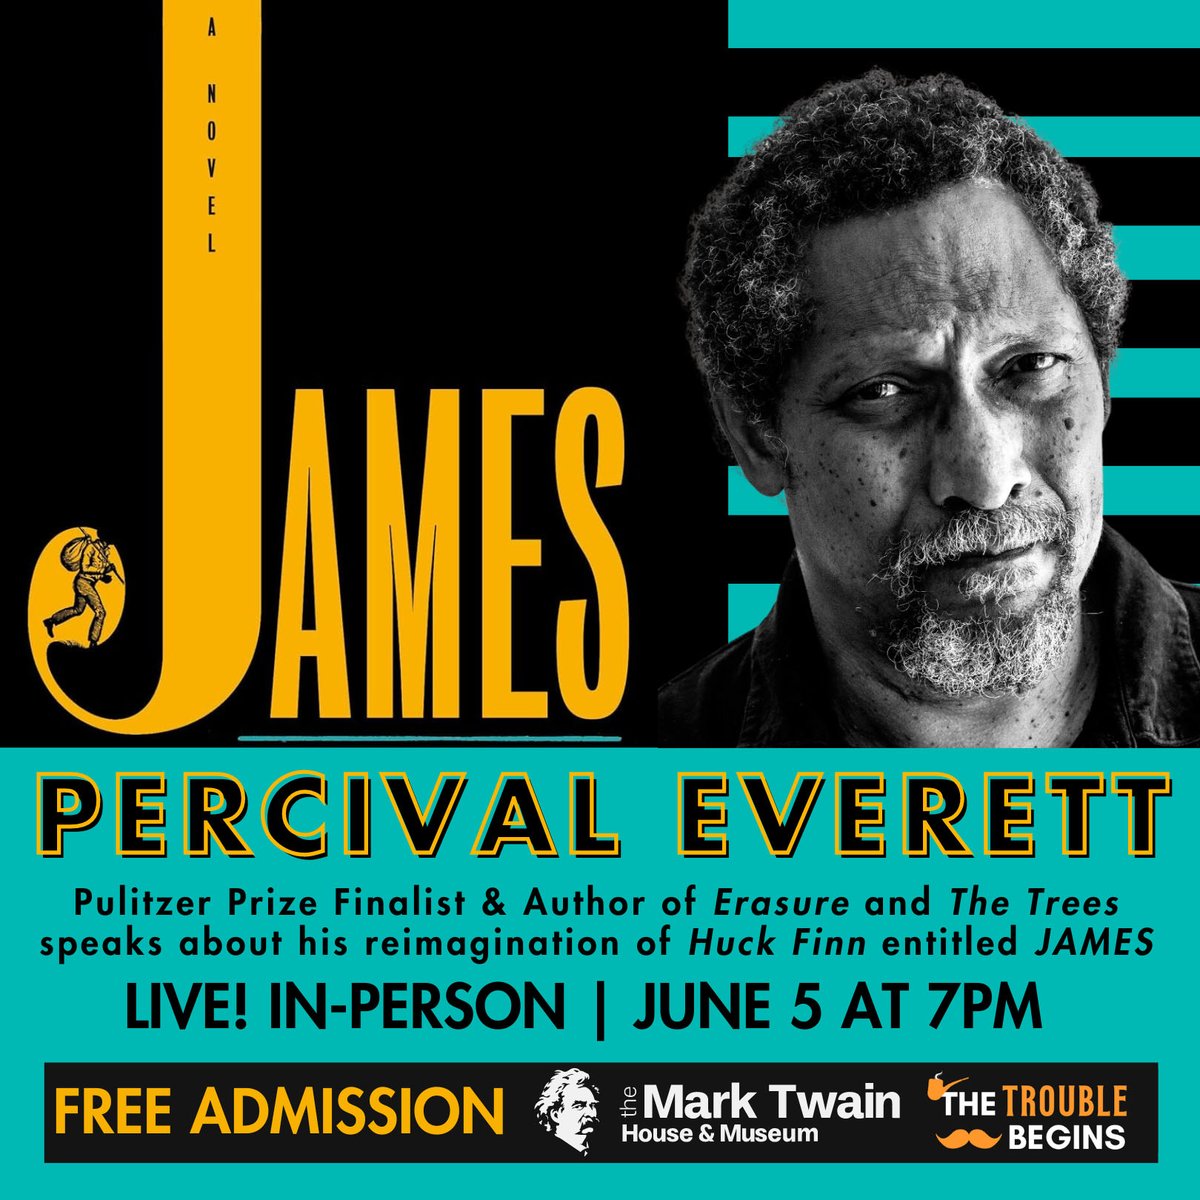 MARK YOUR CALENDARS ✍️
06/05 at 7pm - JAMES with author  #PercivalEverett alongside @michaelharriot: A Trouble Begins Special Event

This is a FREE In-Person Event sponsored by Kathleen and David Jimenez. Learn more & REGISTER HERE: marktwainhouse.org/event/james-wi…

#Hartford #CT #JAMES